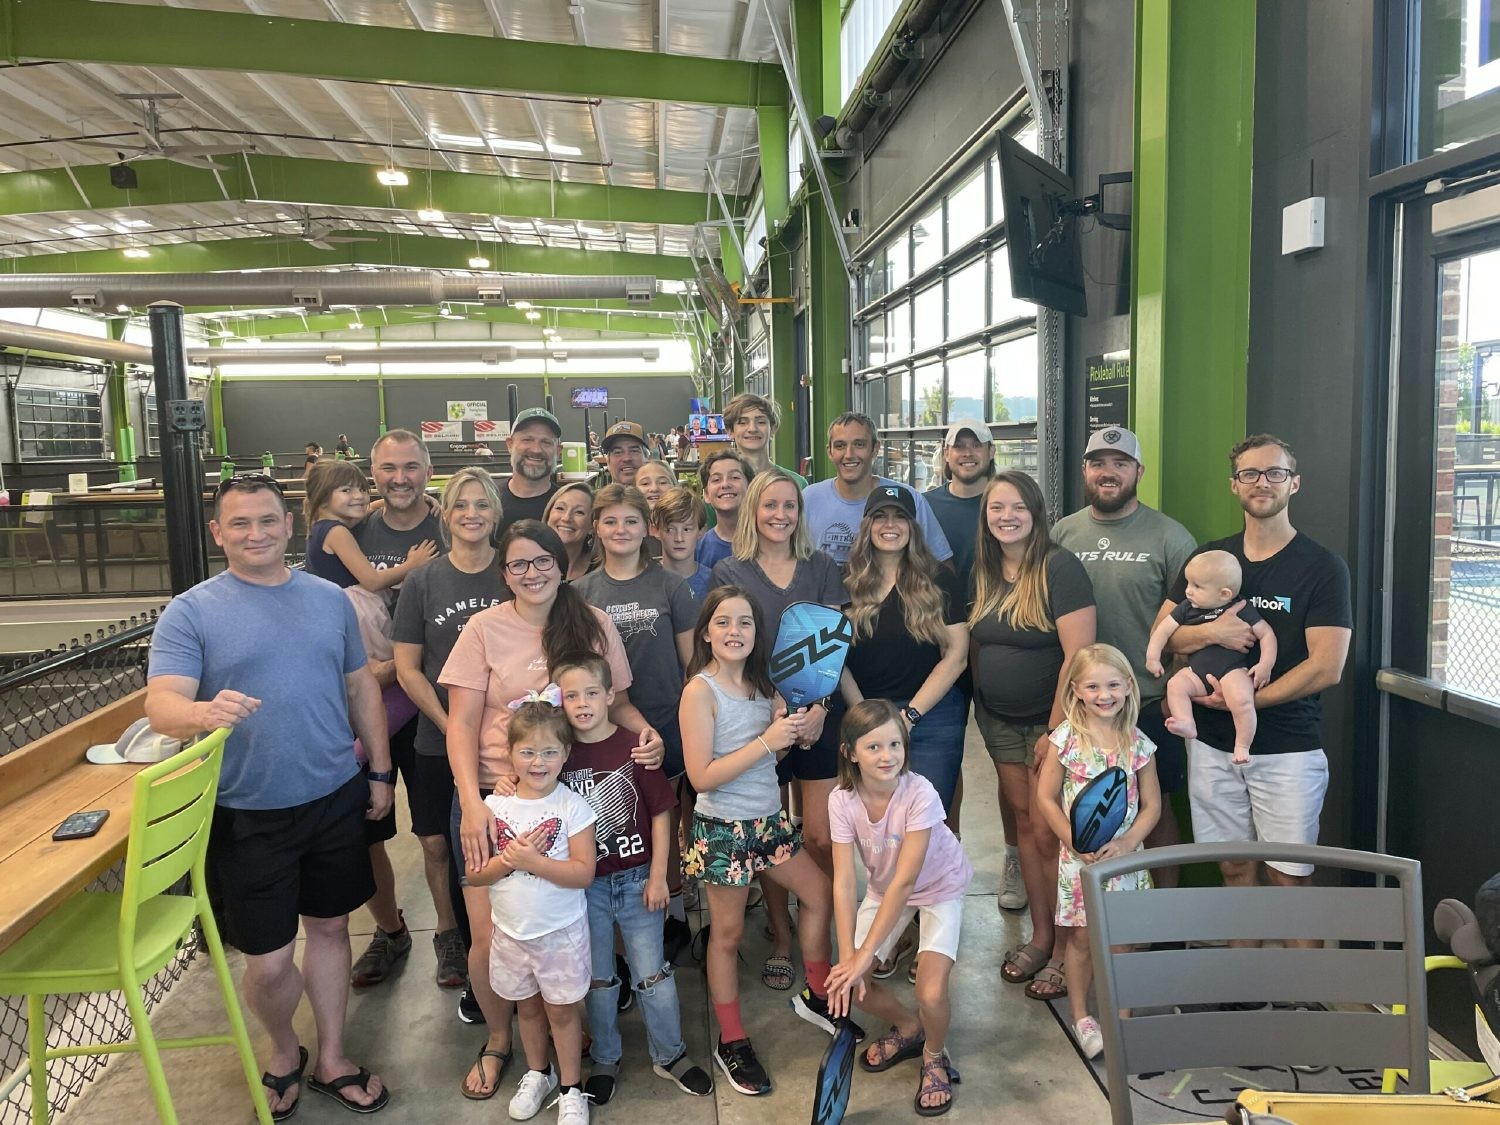 Our Wichita Kansas group and their families enjoying a meet up at their favorite local meet up.